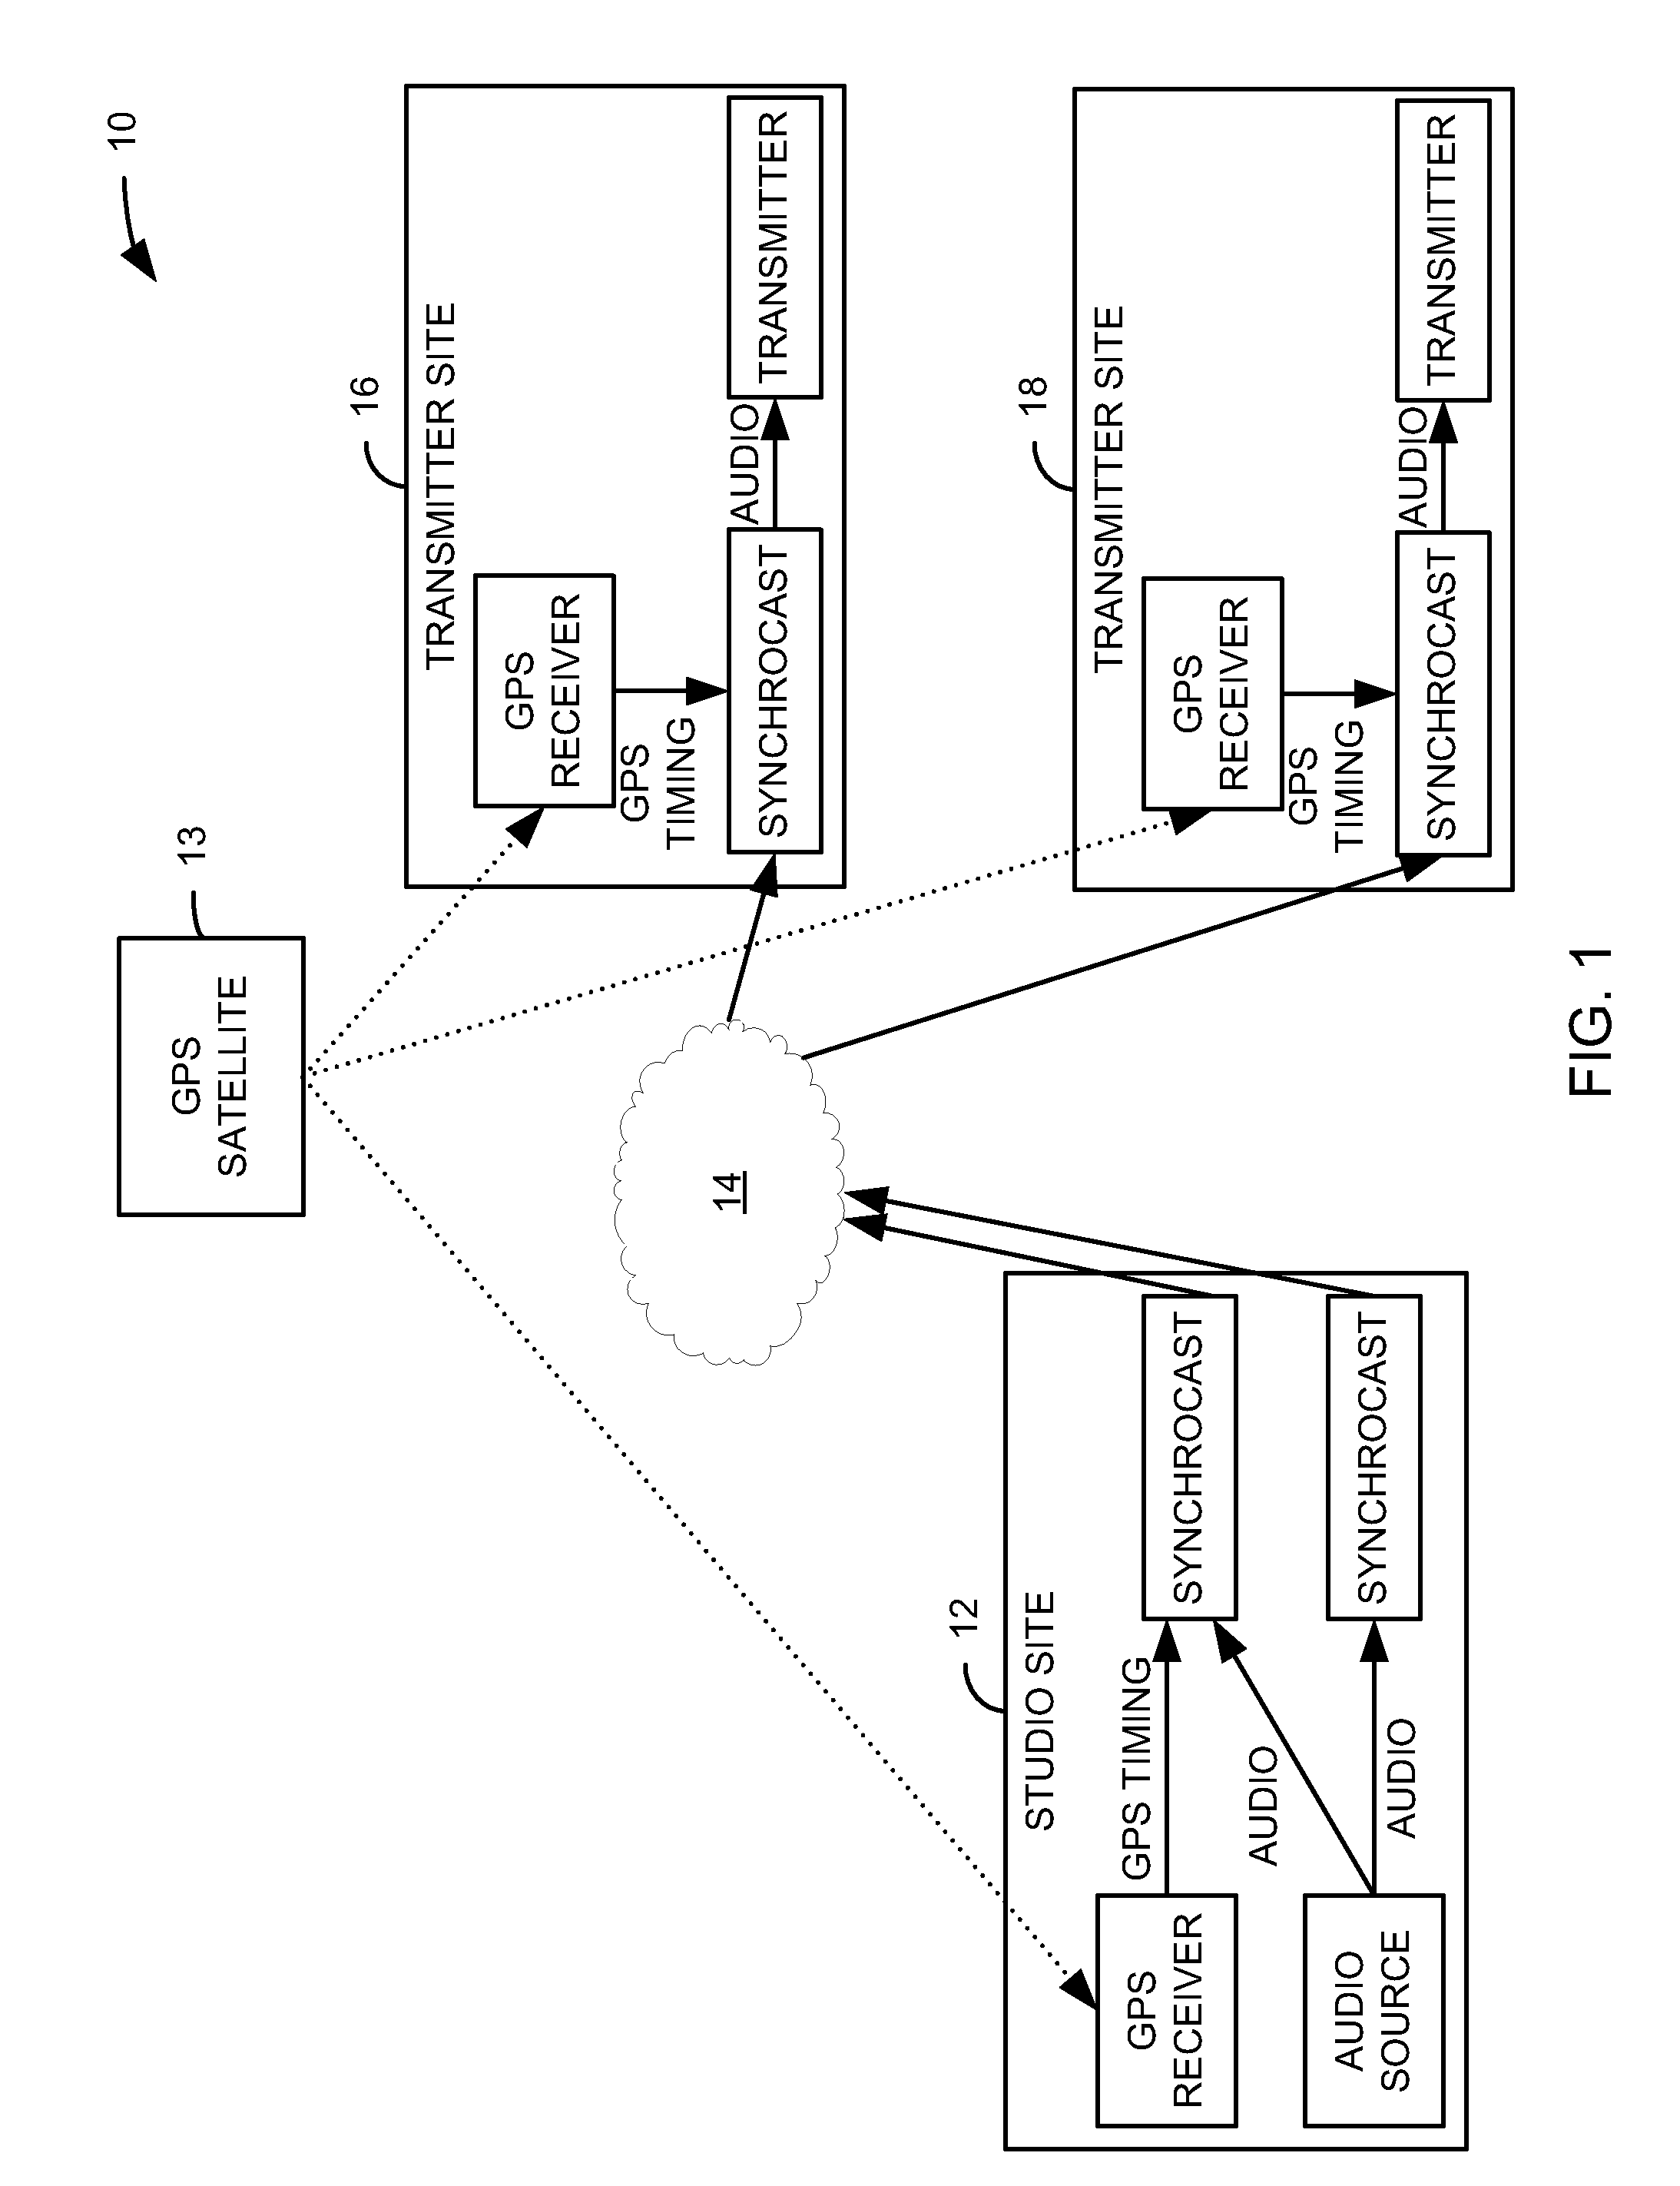 Automatic delay compensated simulcasting system and method